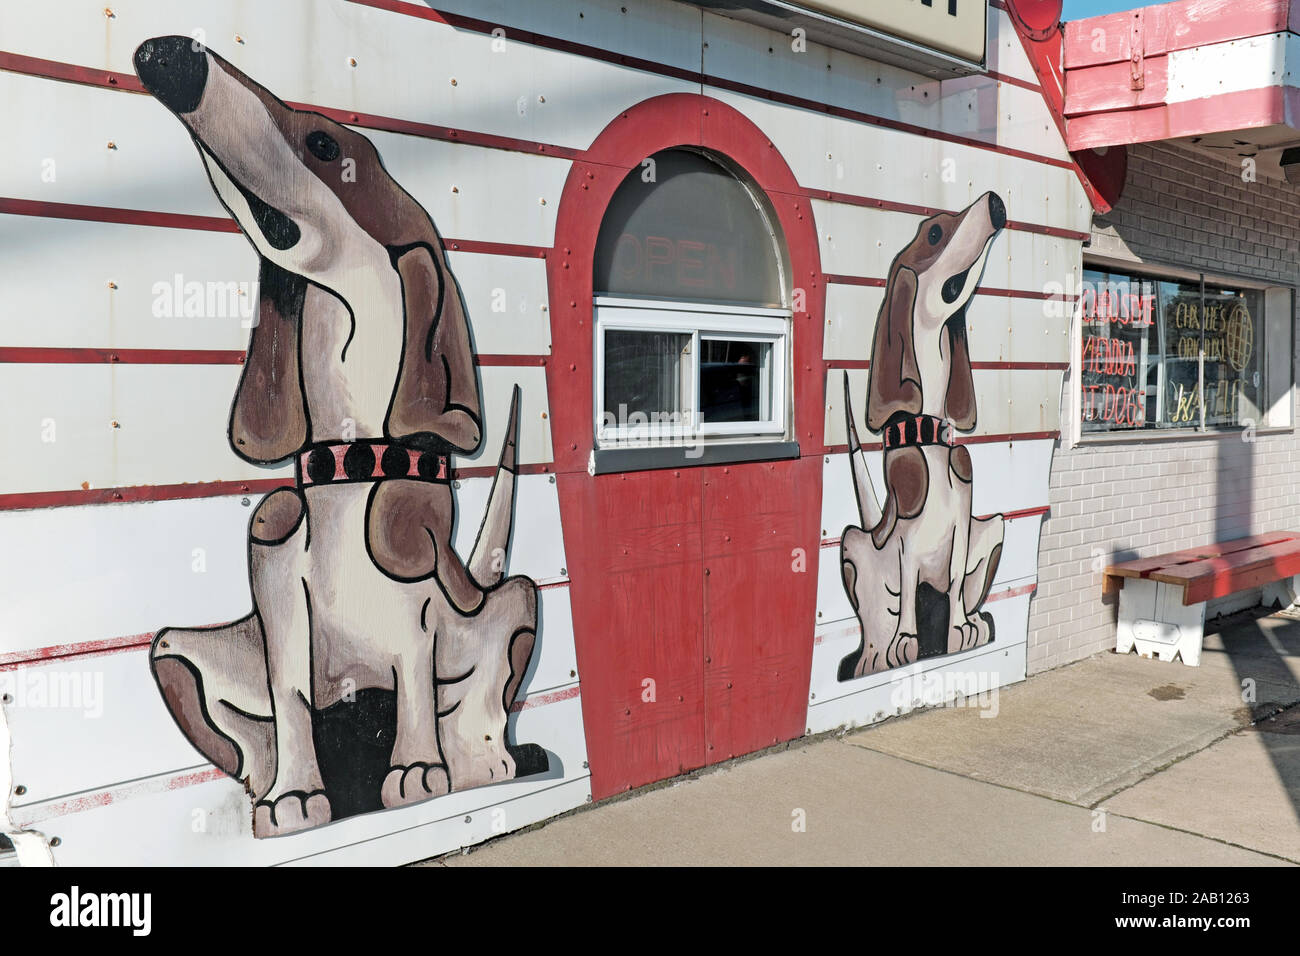 Charlie's Dog House Diner, also known as Charlie's Restaurant, is a retro Americana diner on Brookpark Road in Cleveland, Ohio, USA. Stock Photo